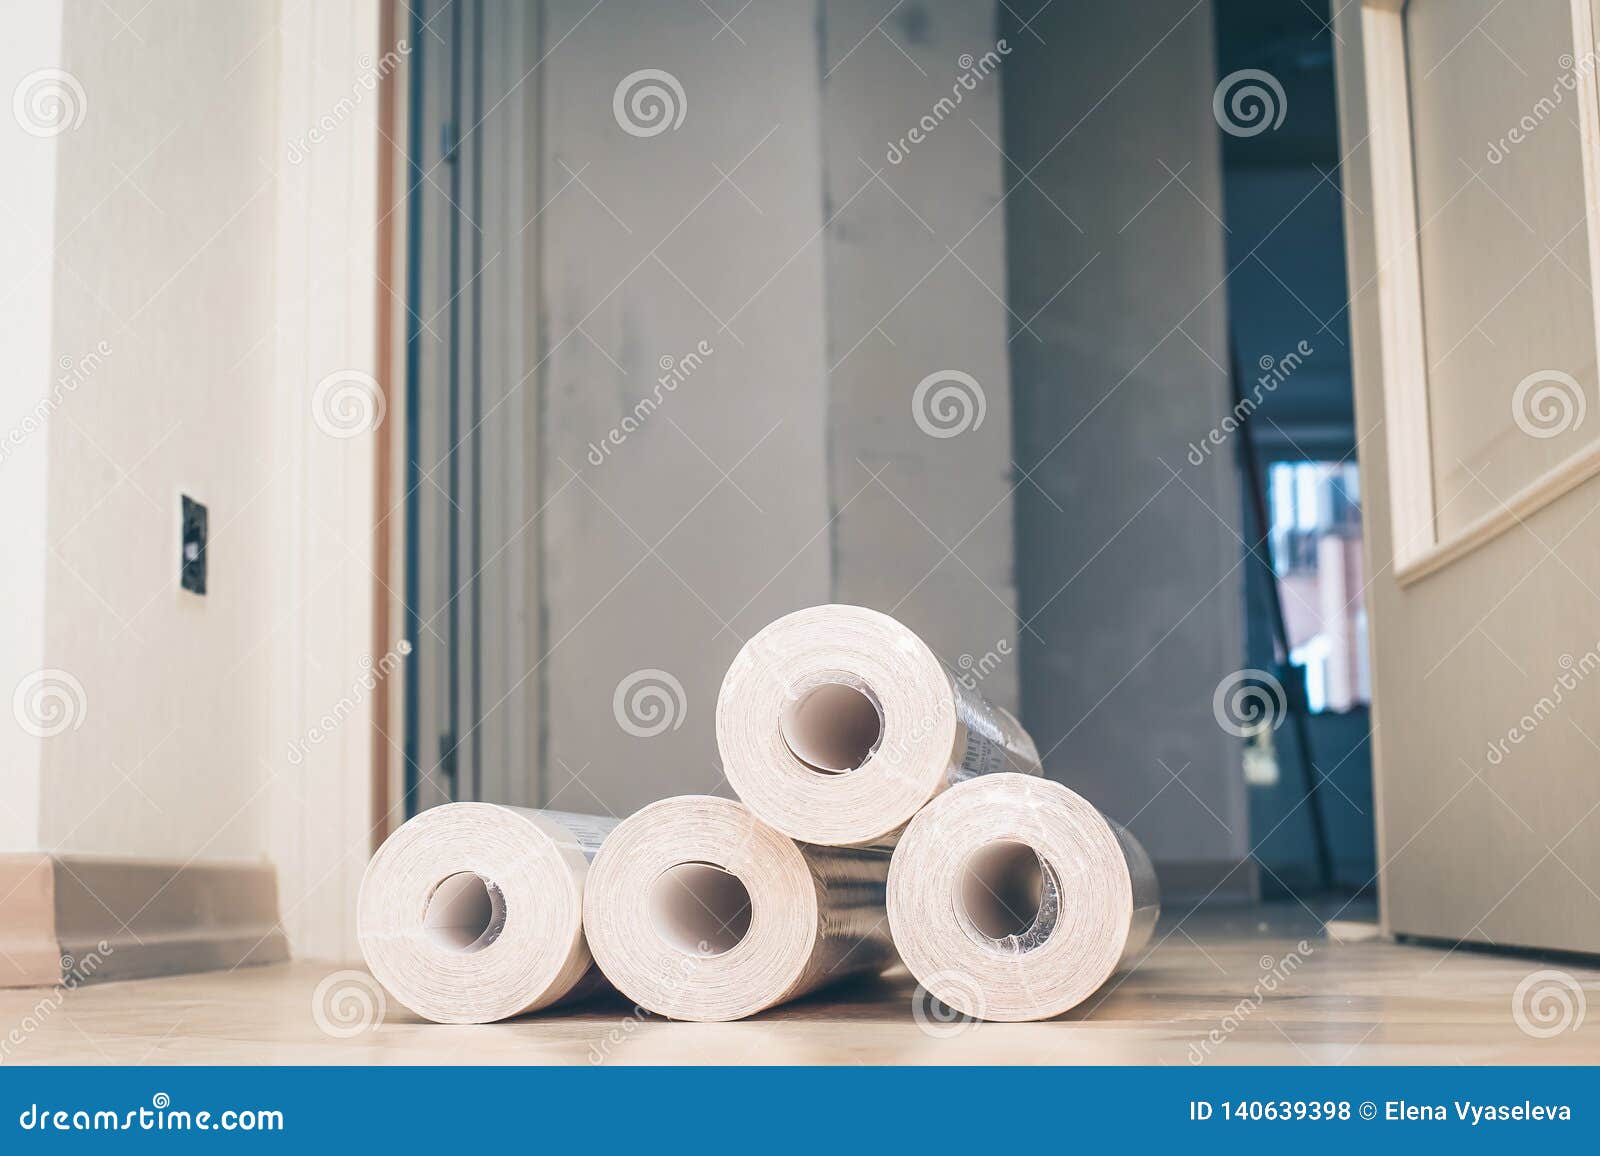 Rolls Of New White Wallpaper Are On The Floor In The